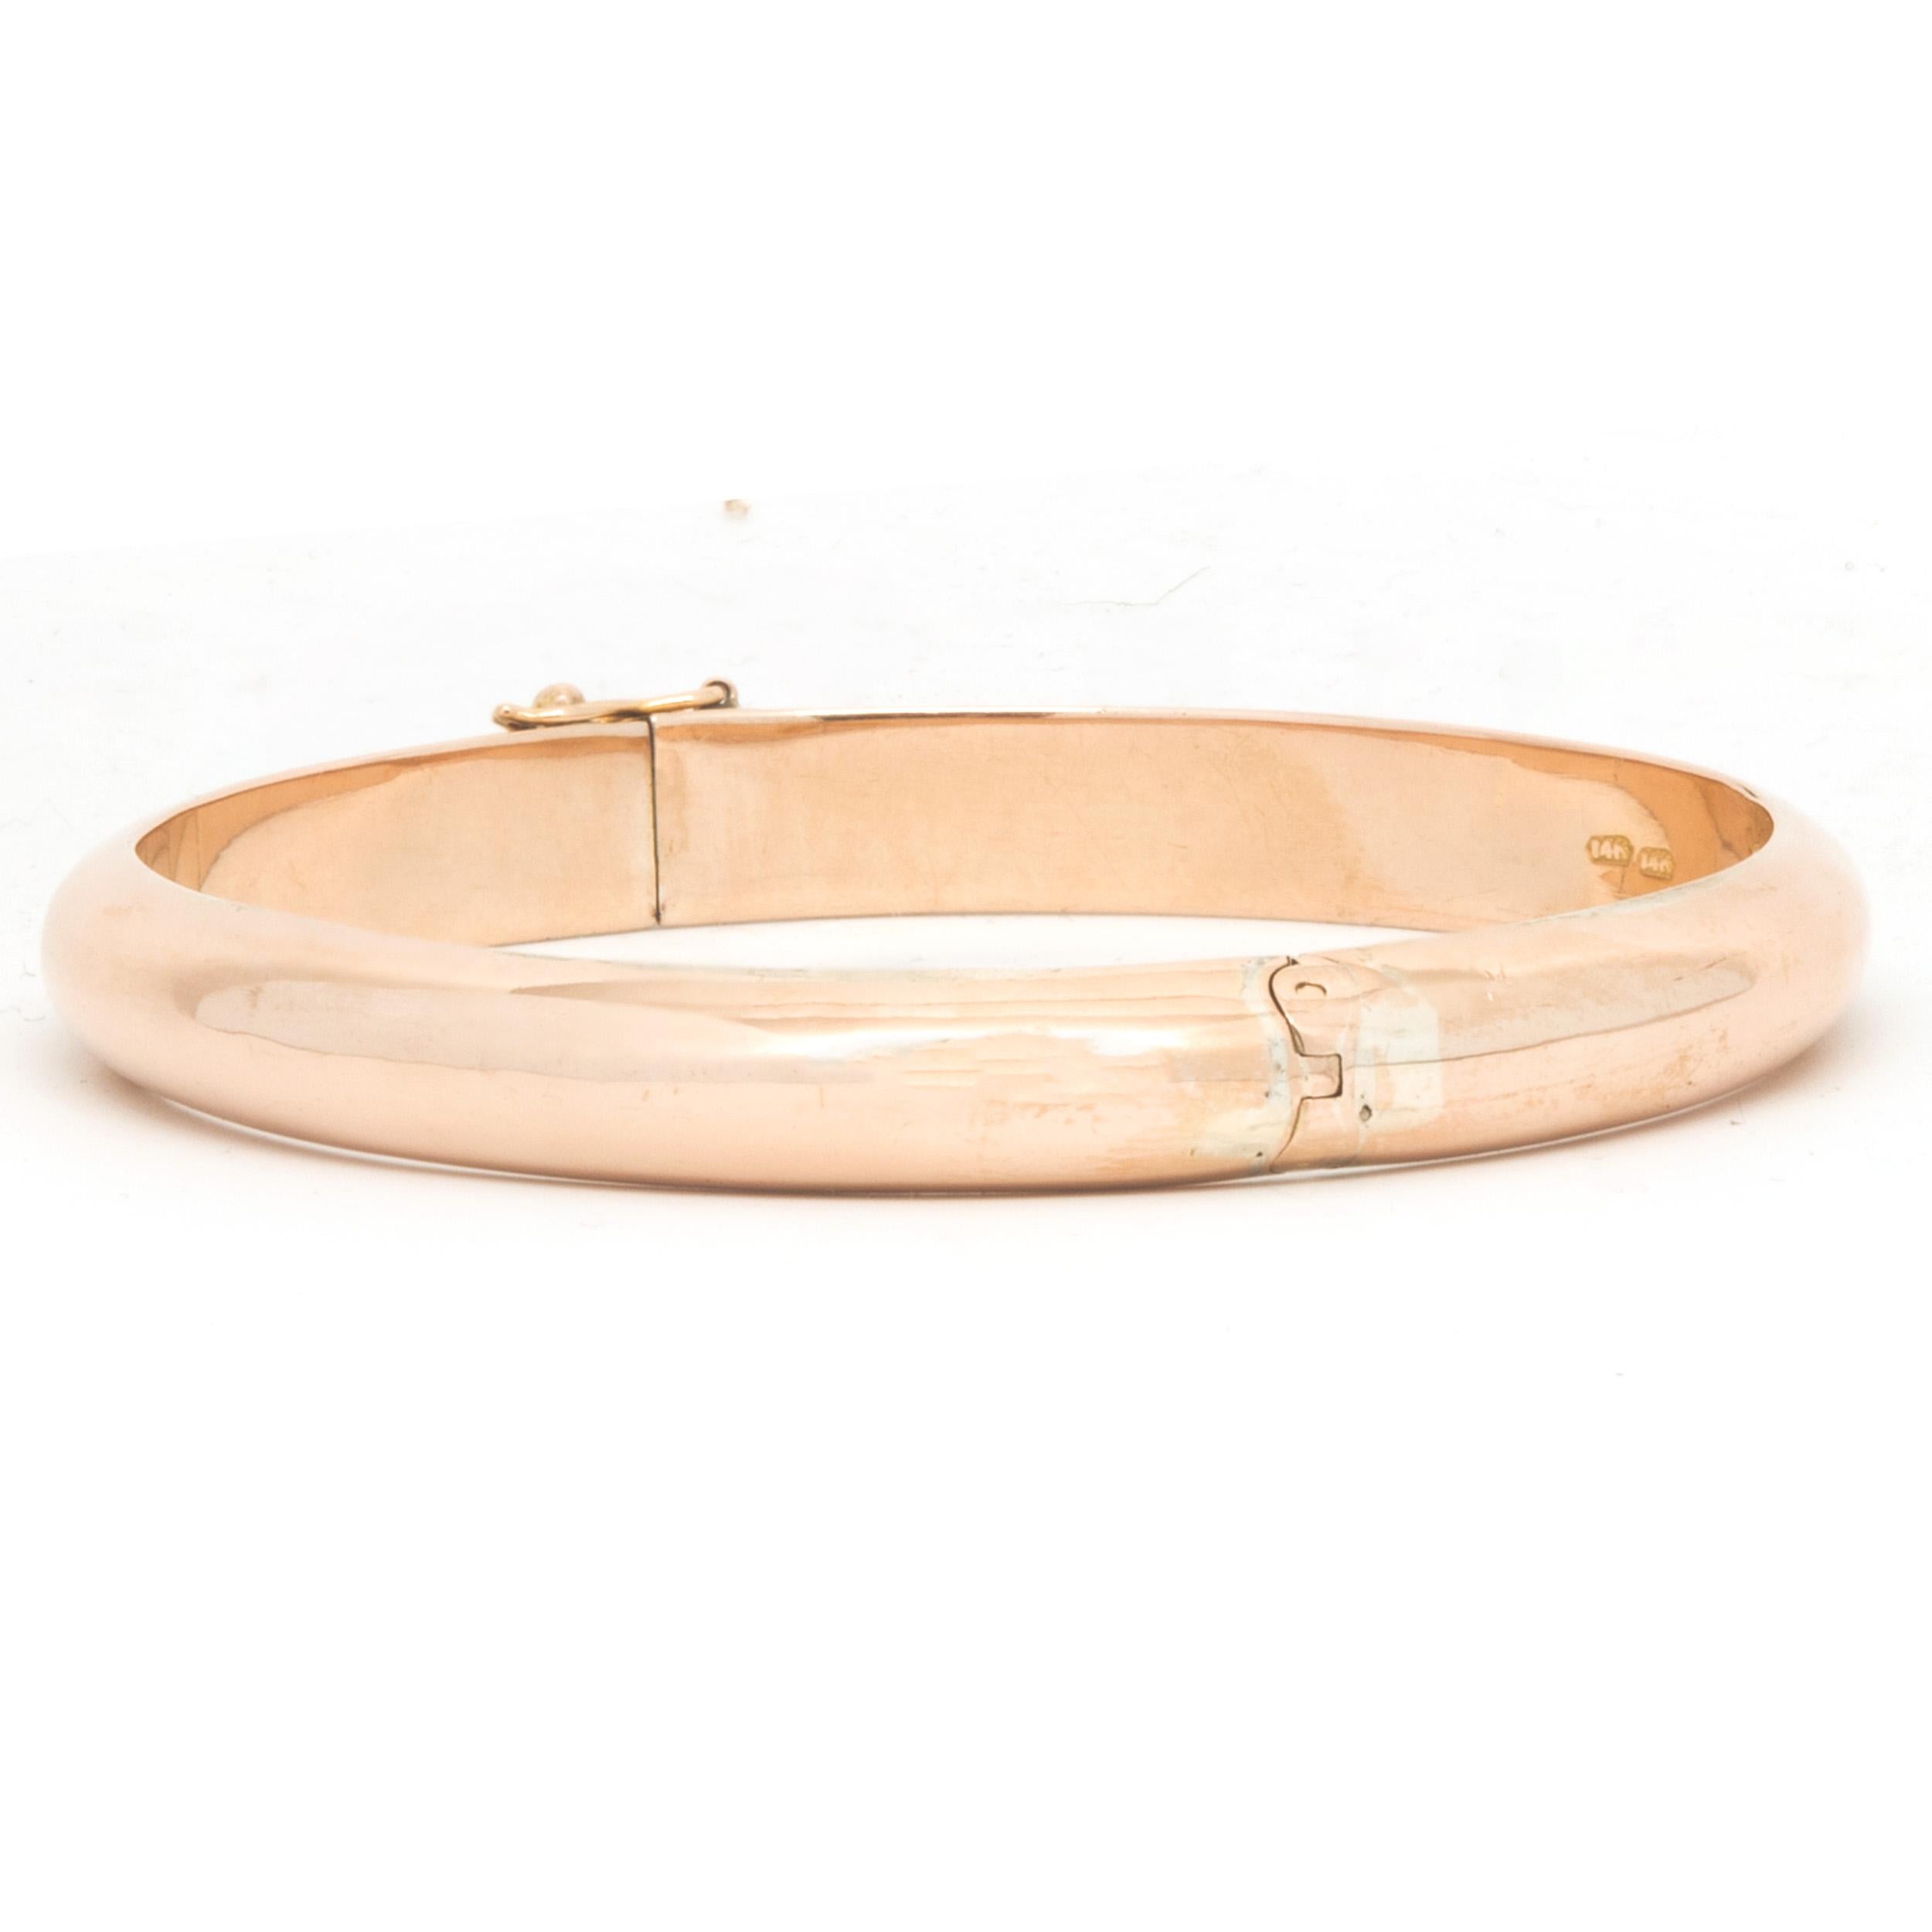 Material: 14K rose gold
Dimensions: bracelet will fit up to a 7-inch wrist
Weight: 26.36 grams